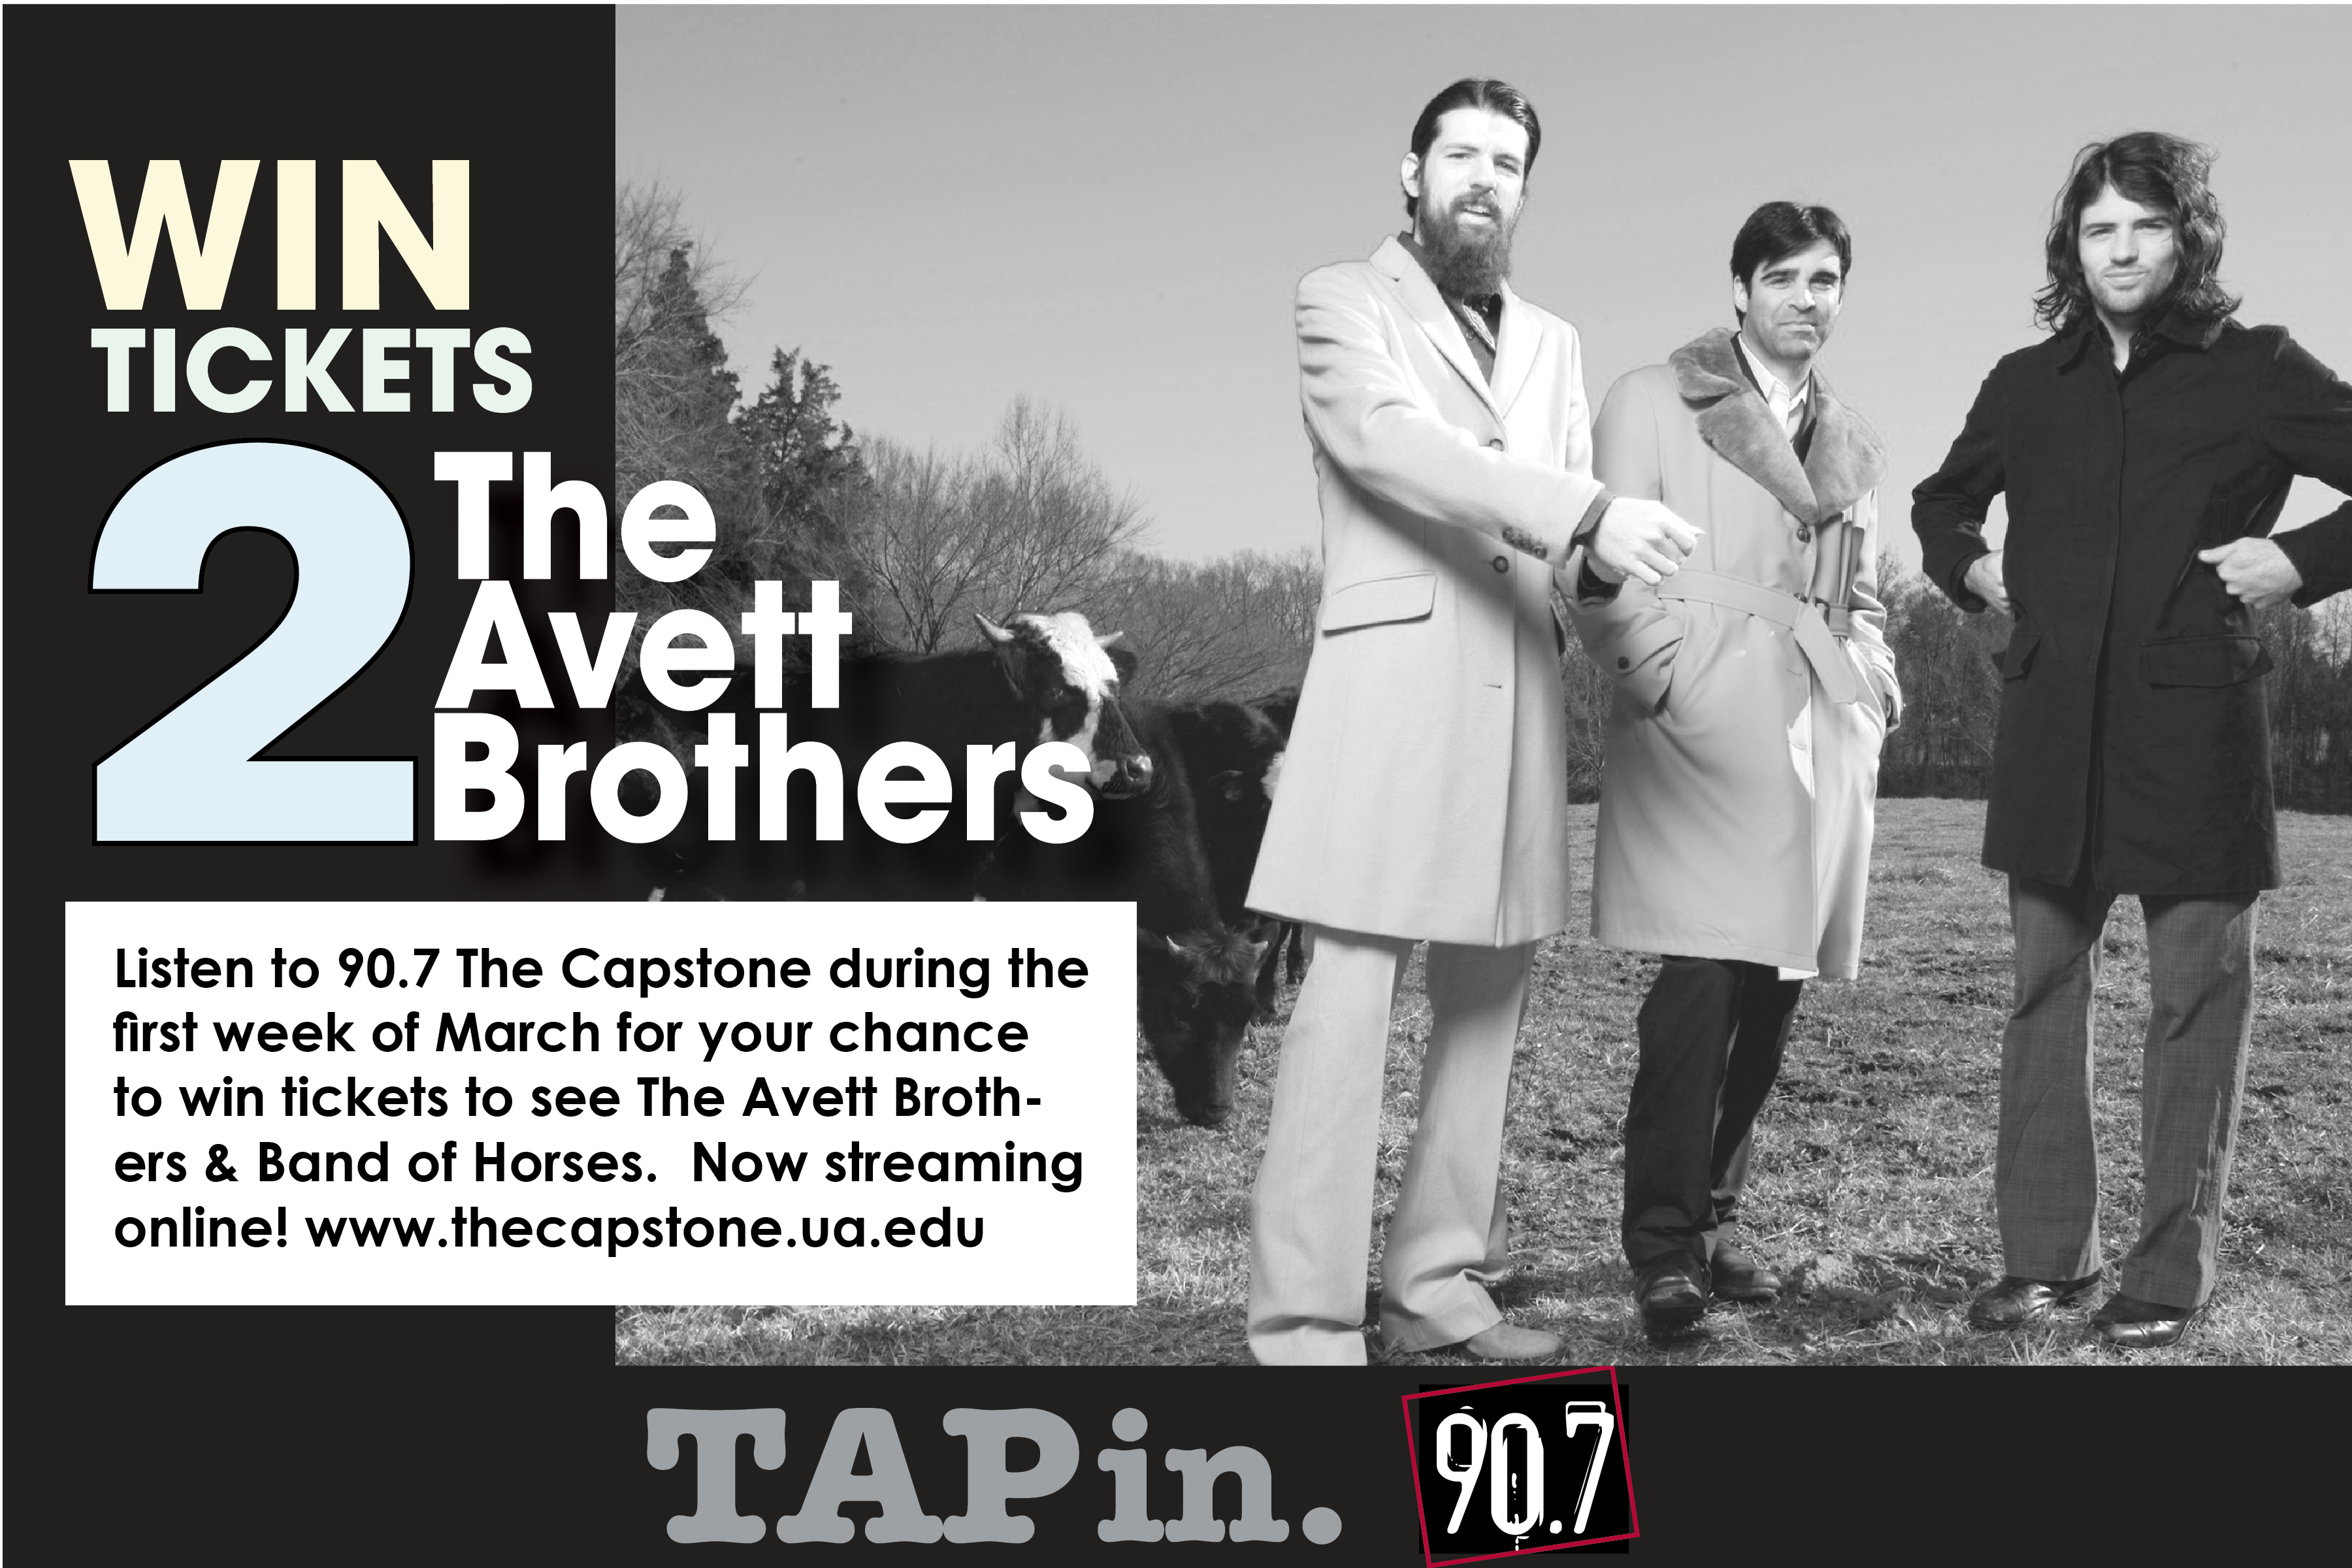 Avett Brothers Ticket Giveaway